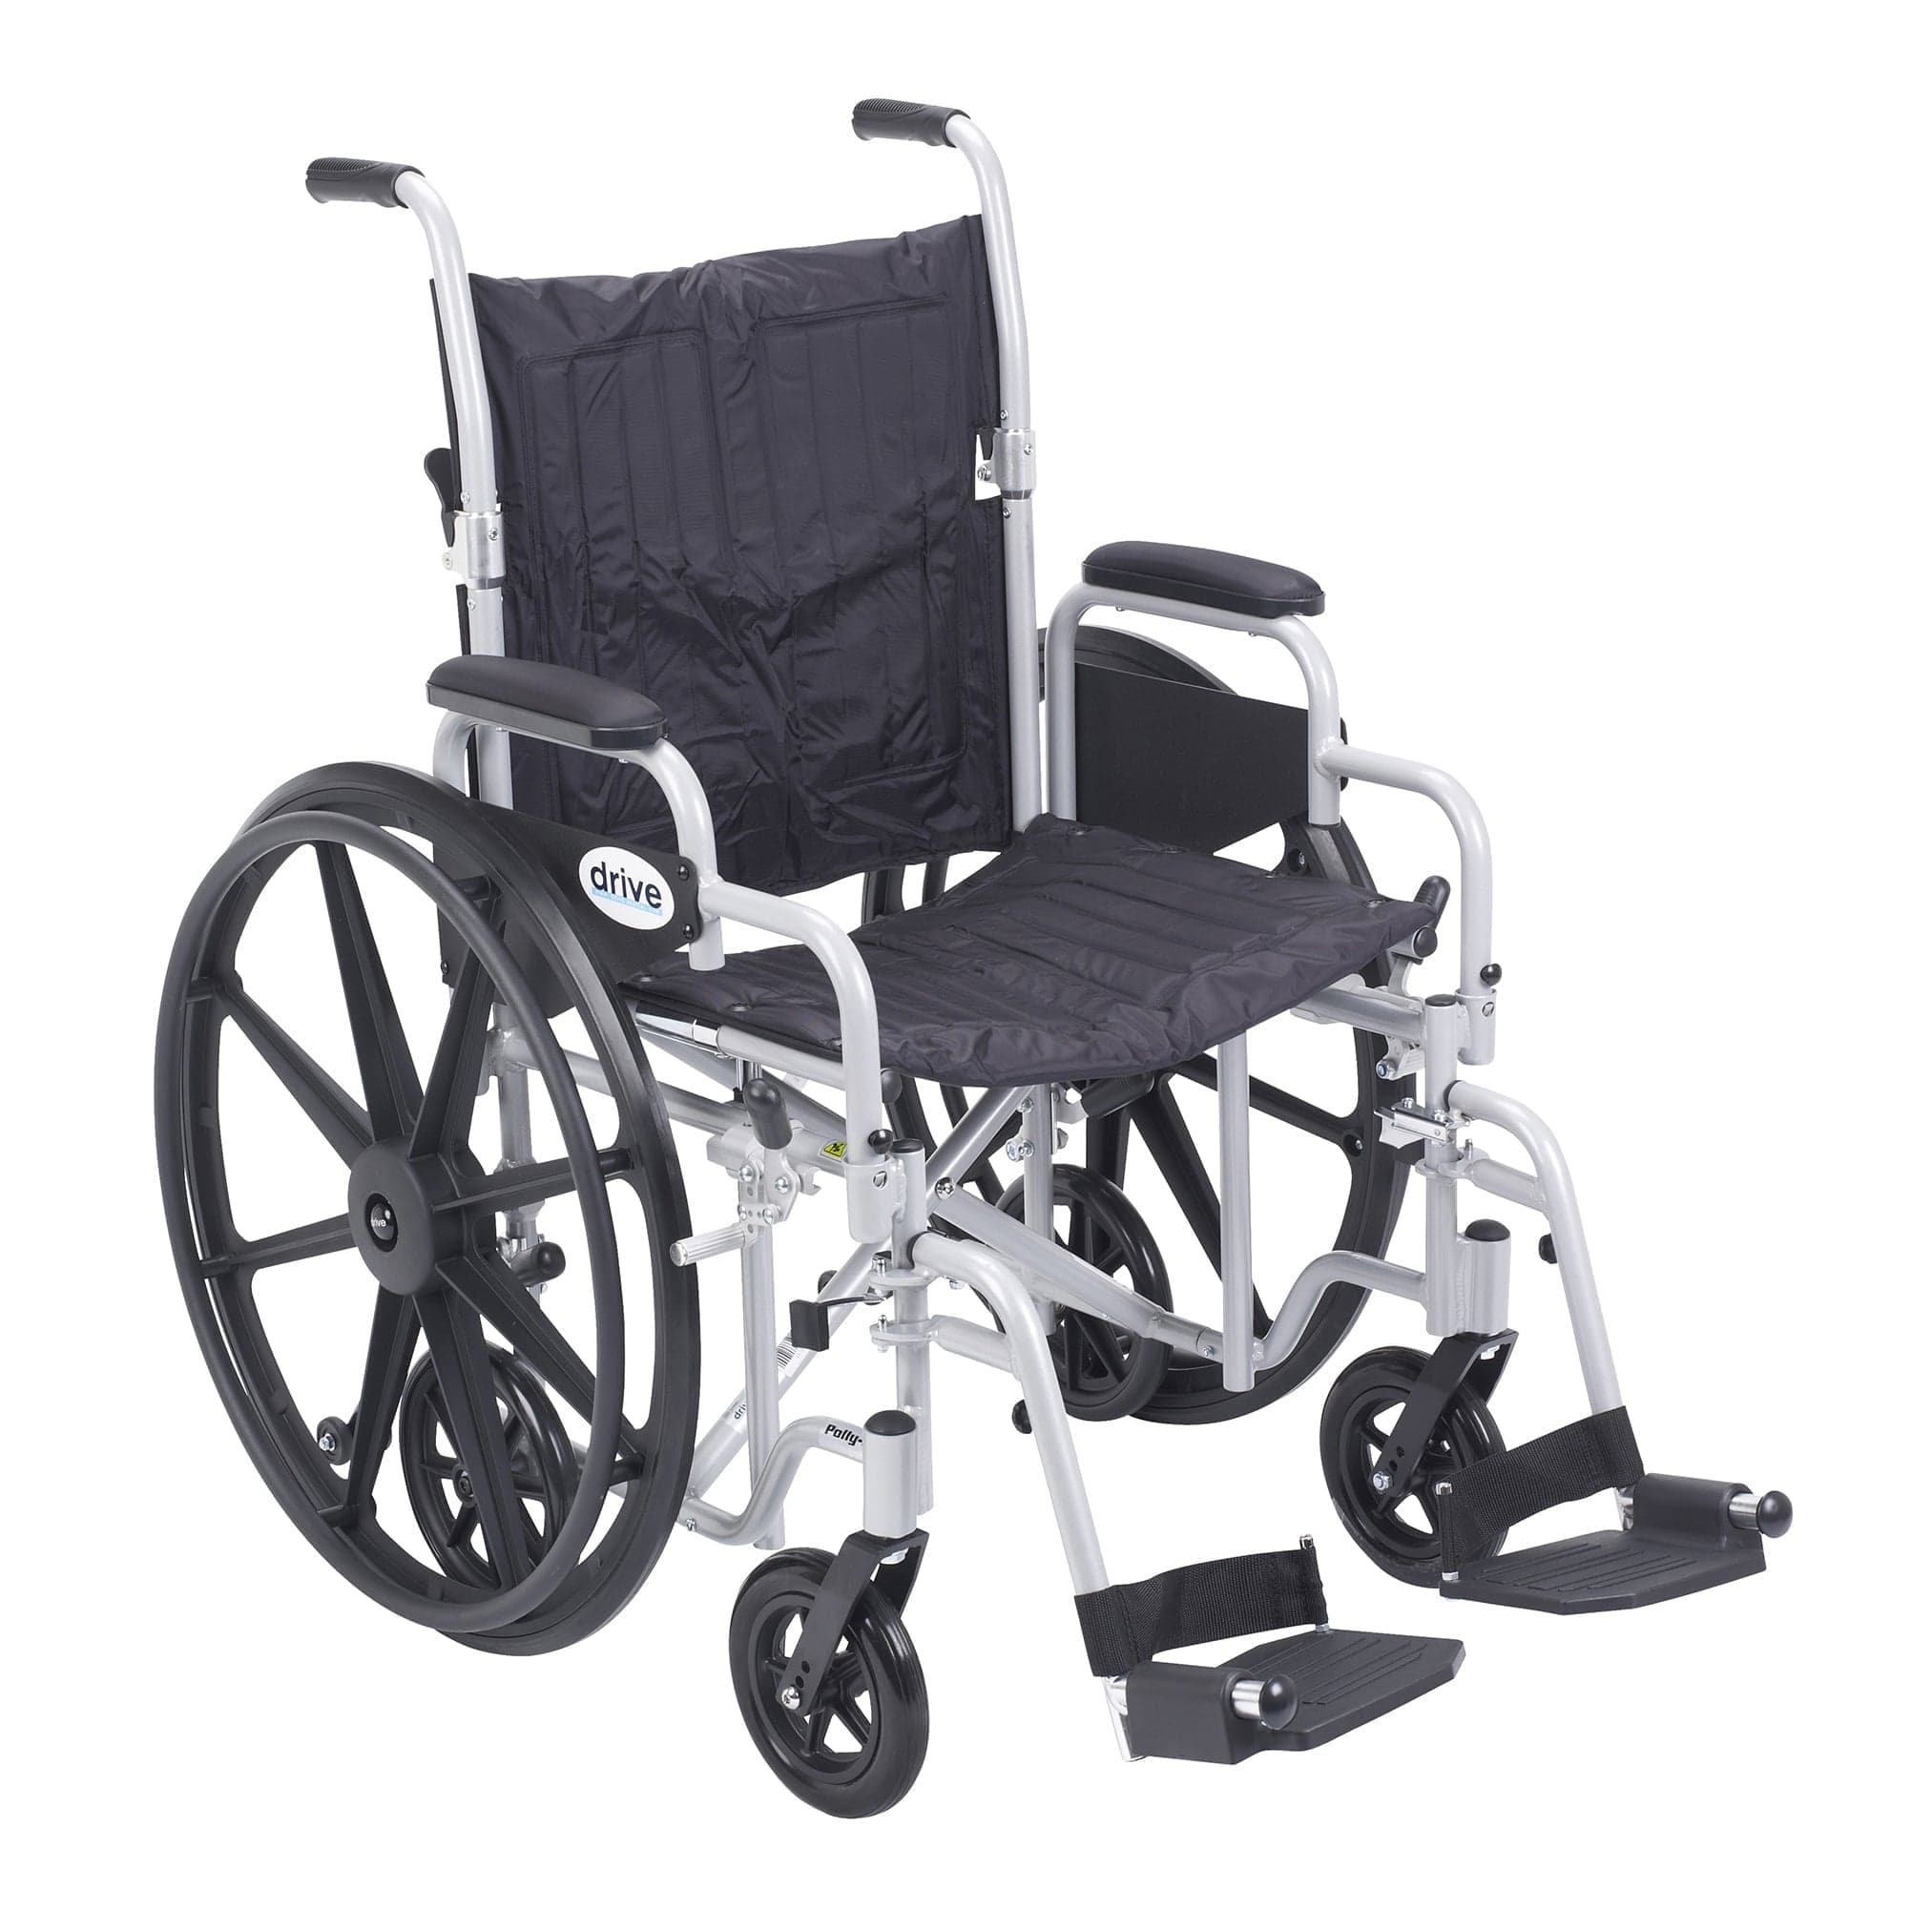 Drive Medical Drive Medical Poly Fly Light Weight Transport Chair Wheelchair with Swing away Footrest